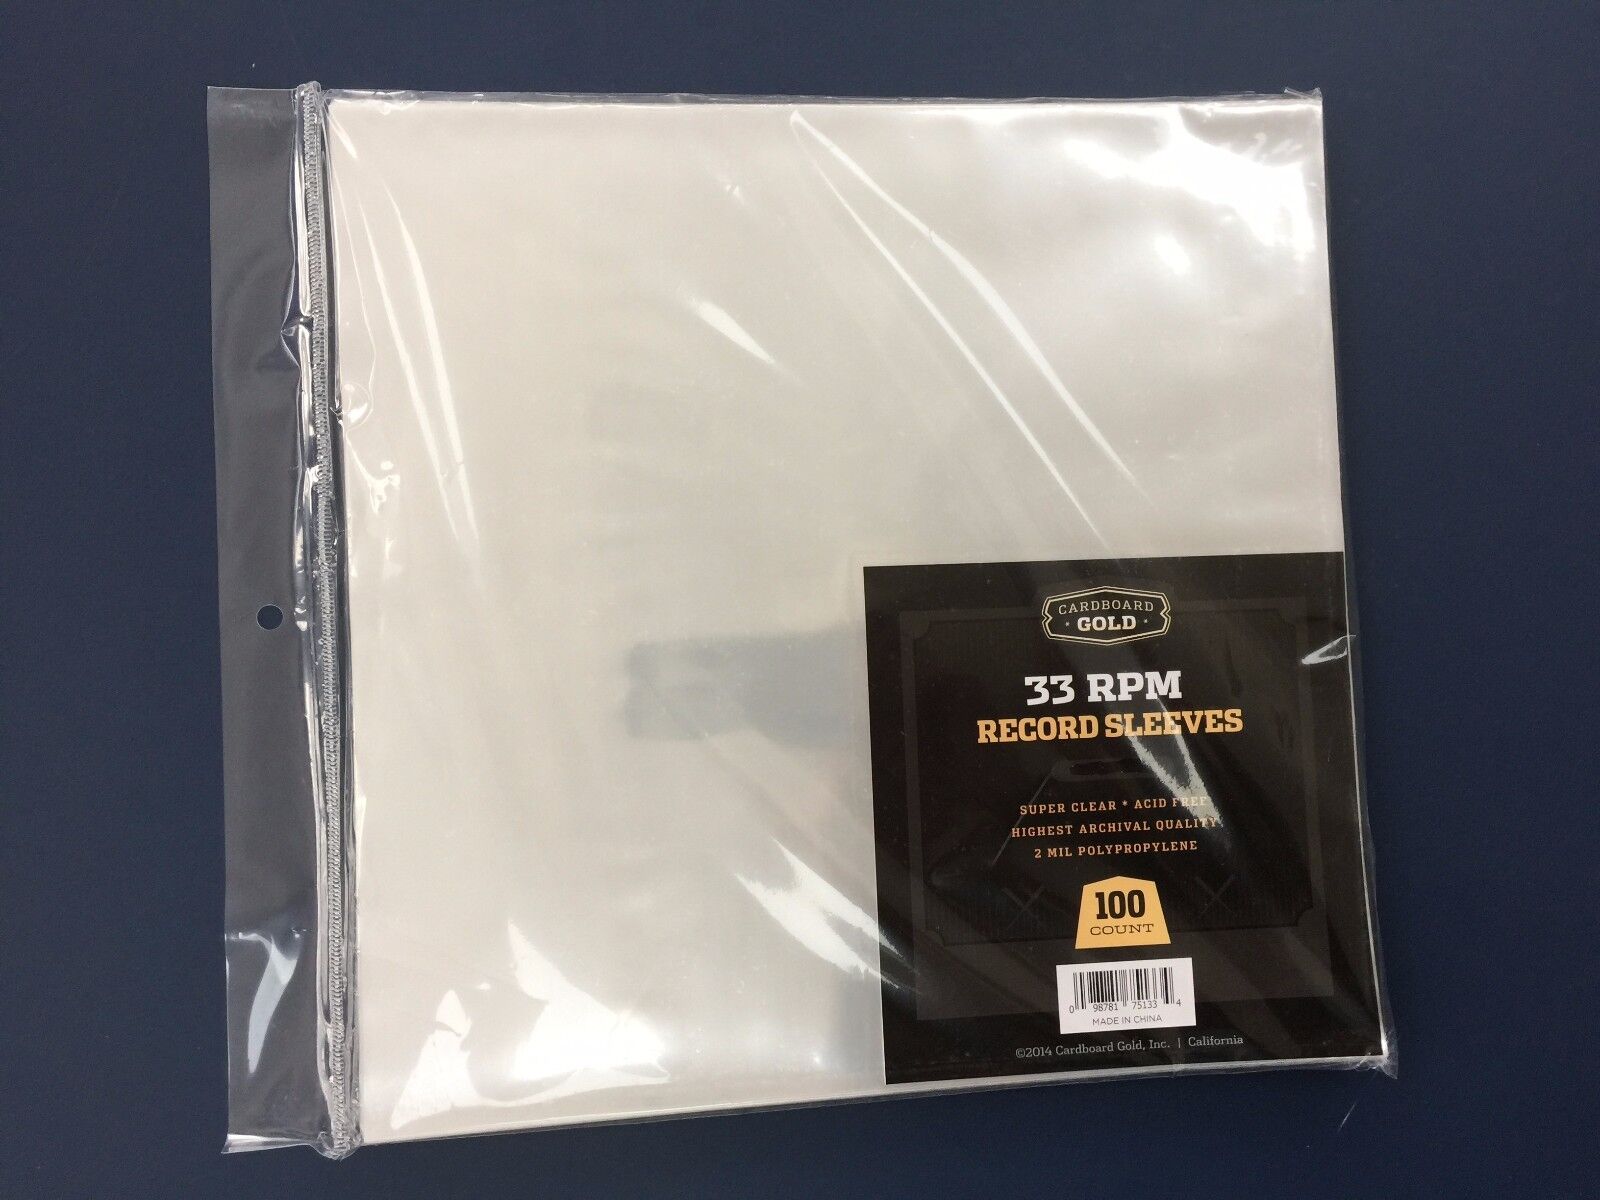 500 Clear Poly Plastic LP Outer Sleeves 2 Mil 12" Vinyl 33rpm Record Album Cover Card Board Gold 33 RPM RECORD SLEEVES - фотография #2